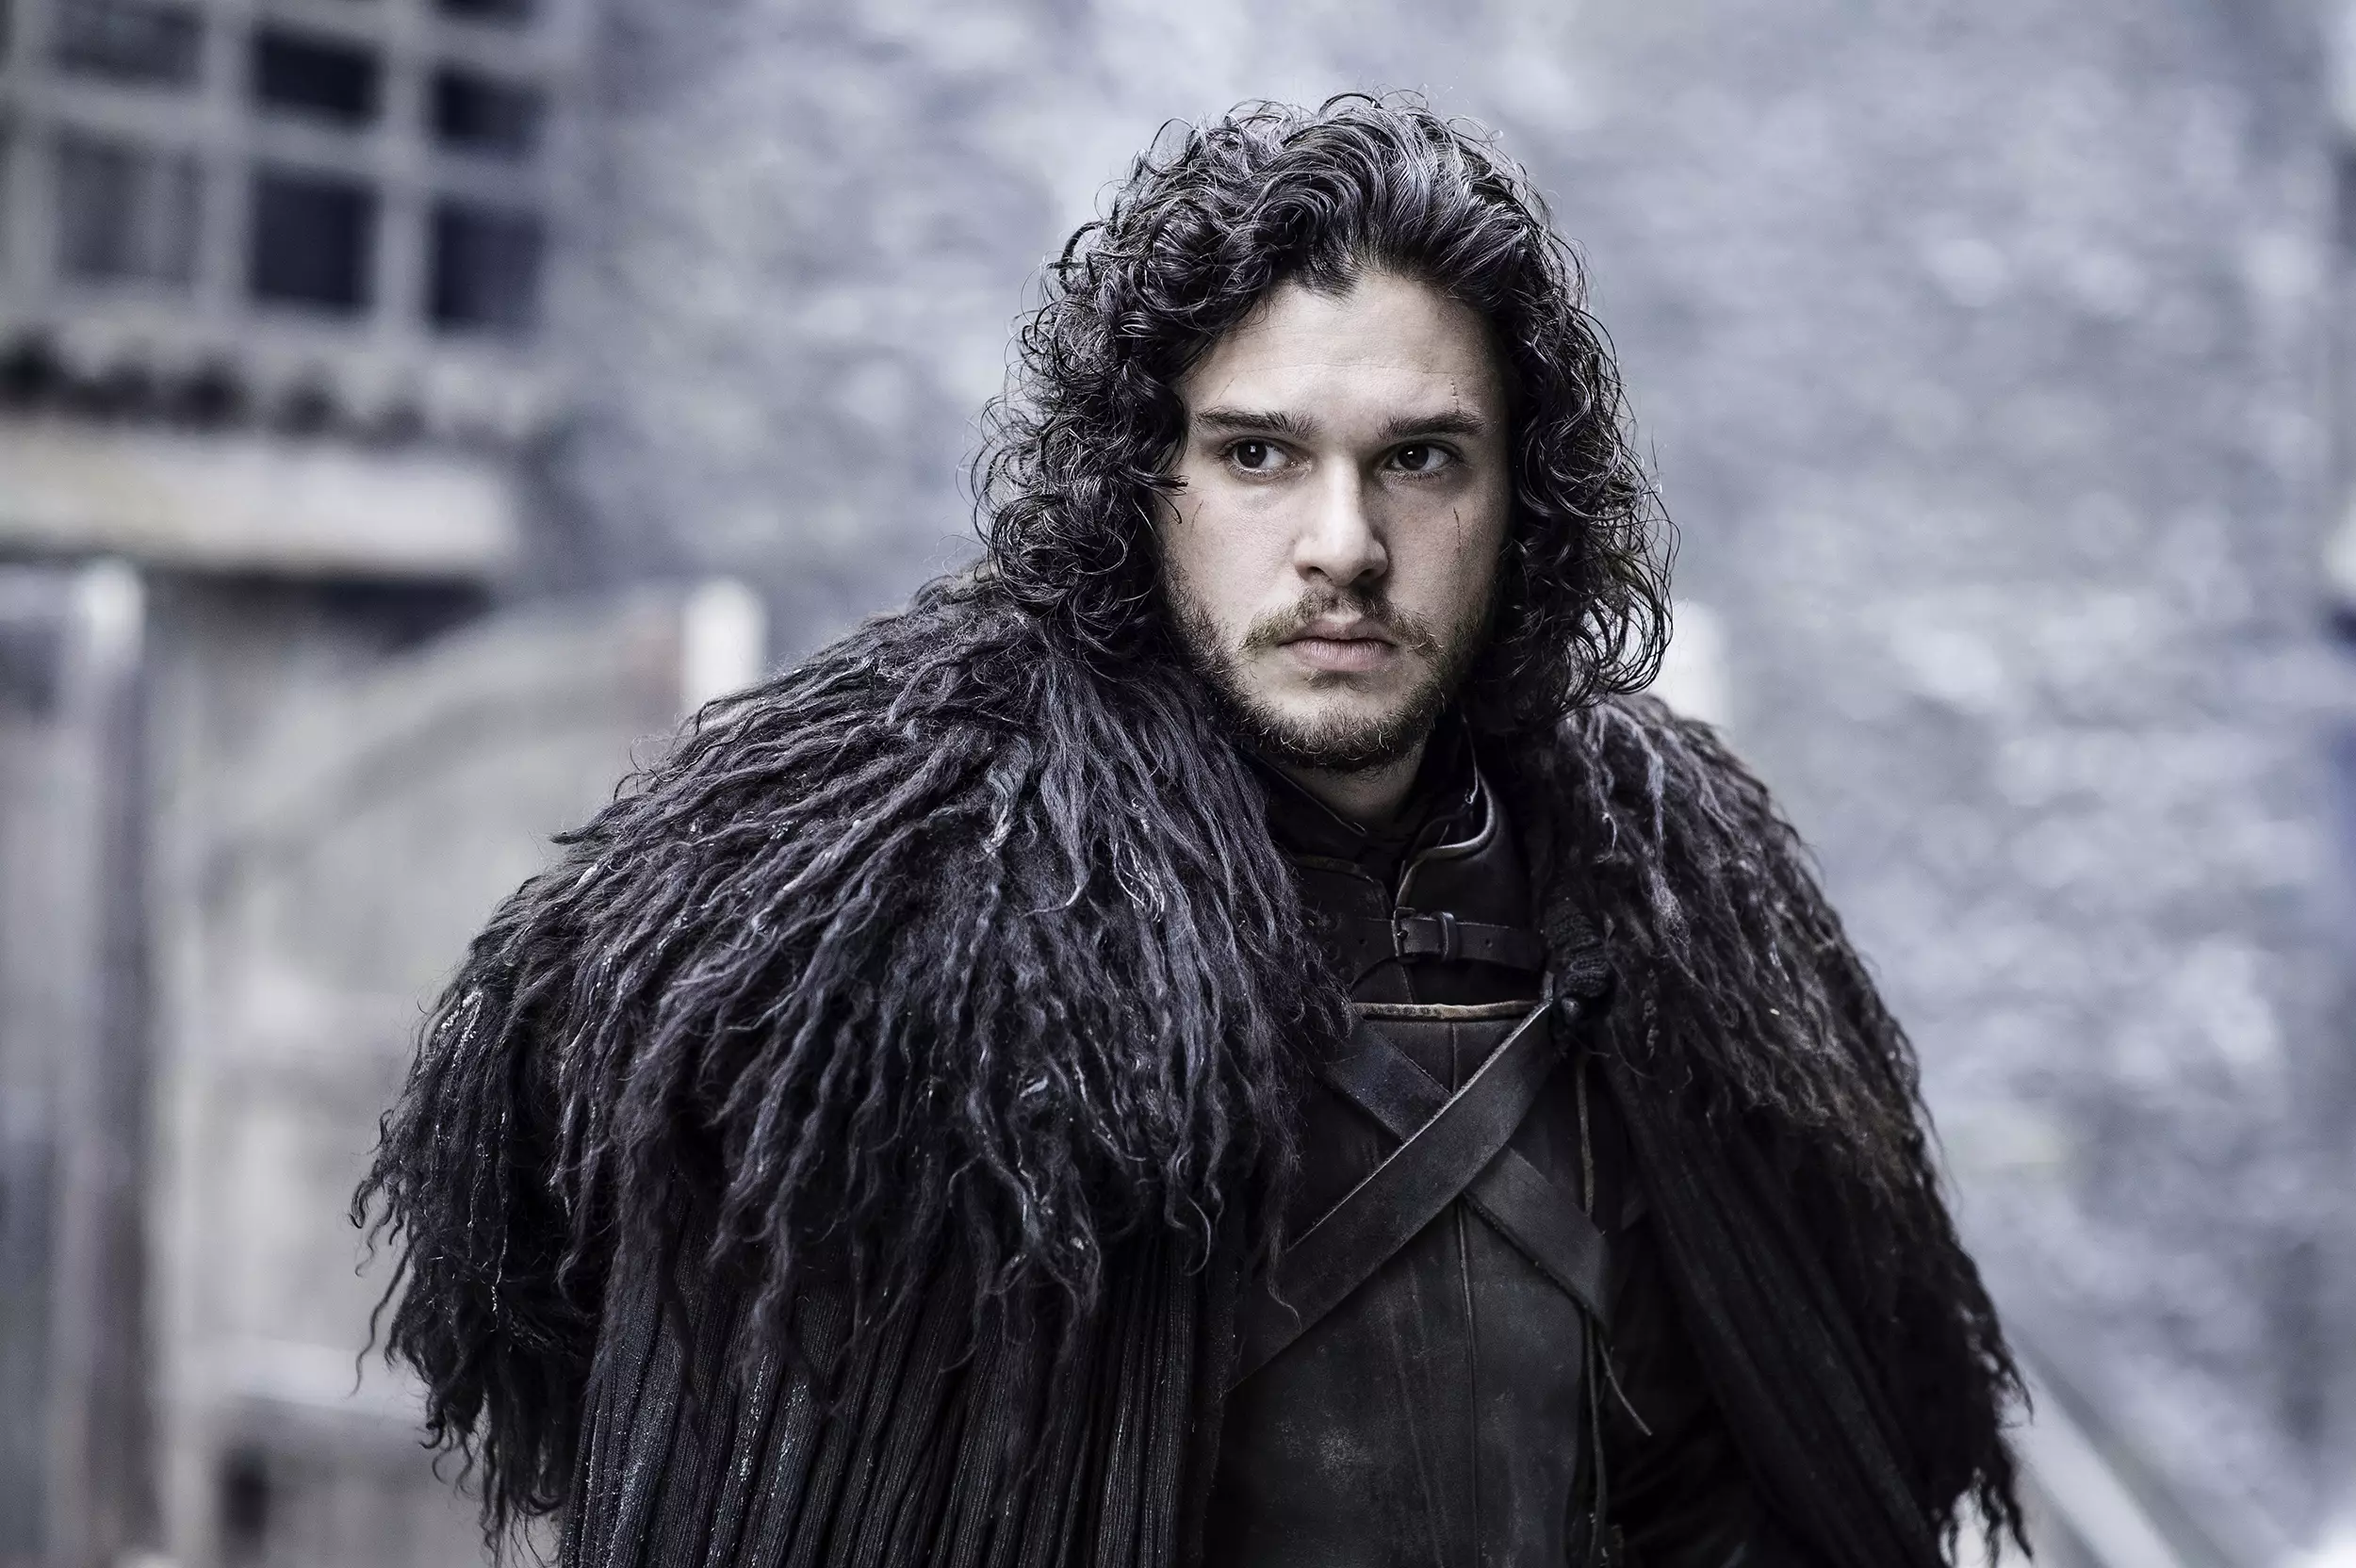 Kit Harington is best known for playing Jon Snow in Game of Thrones (